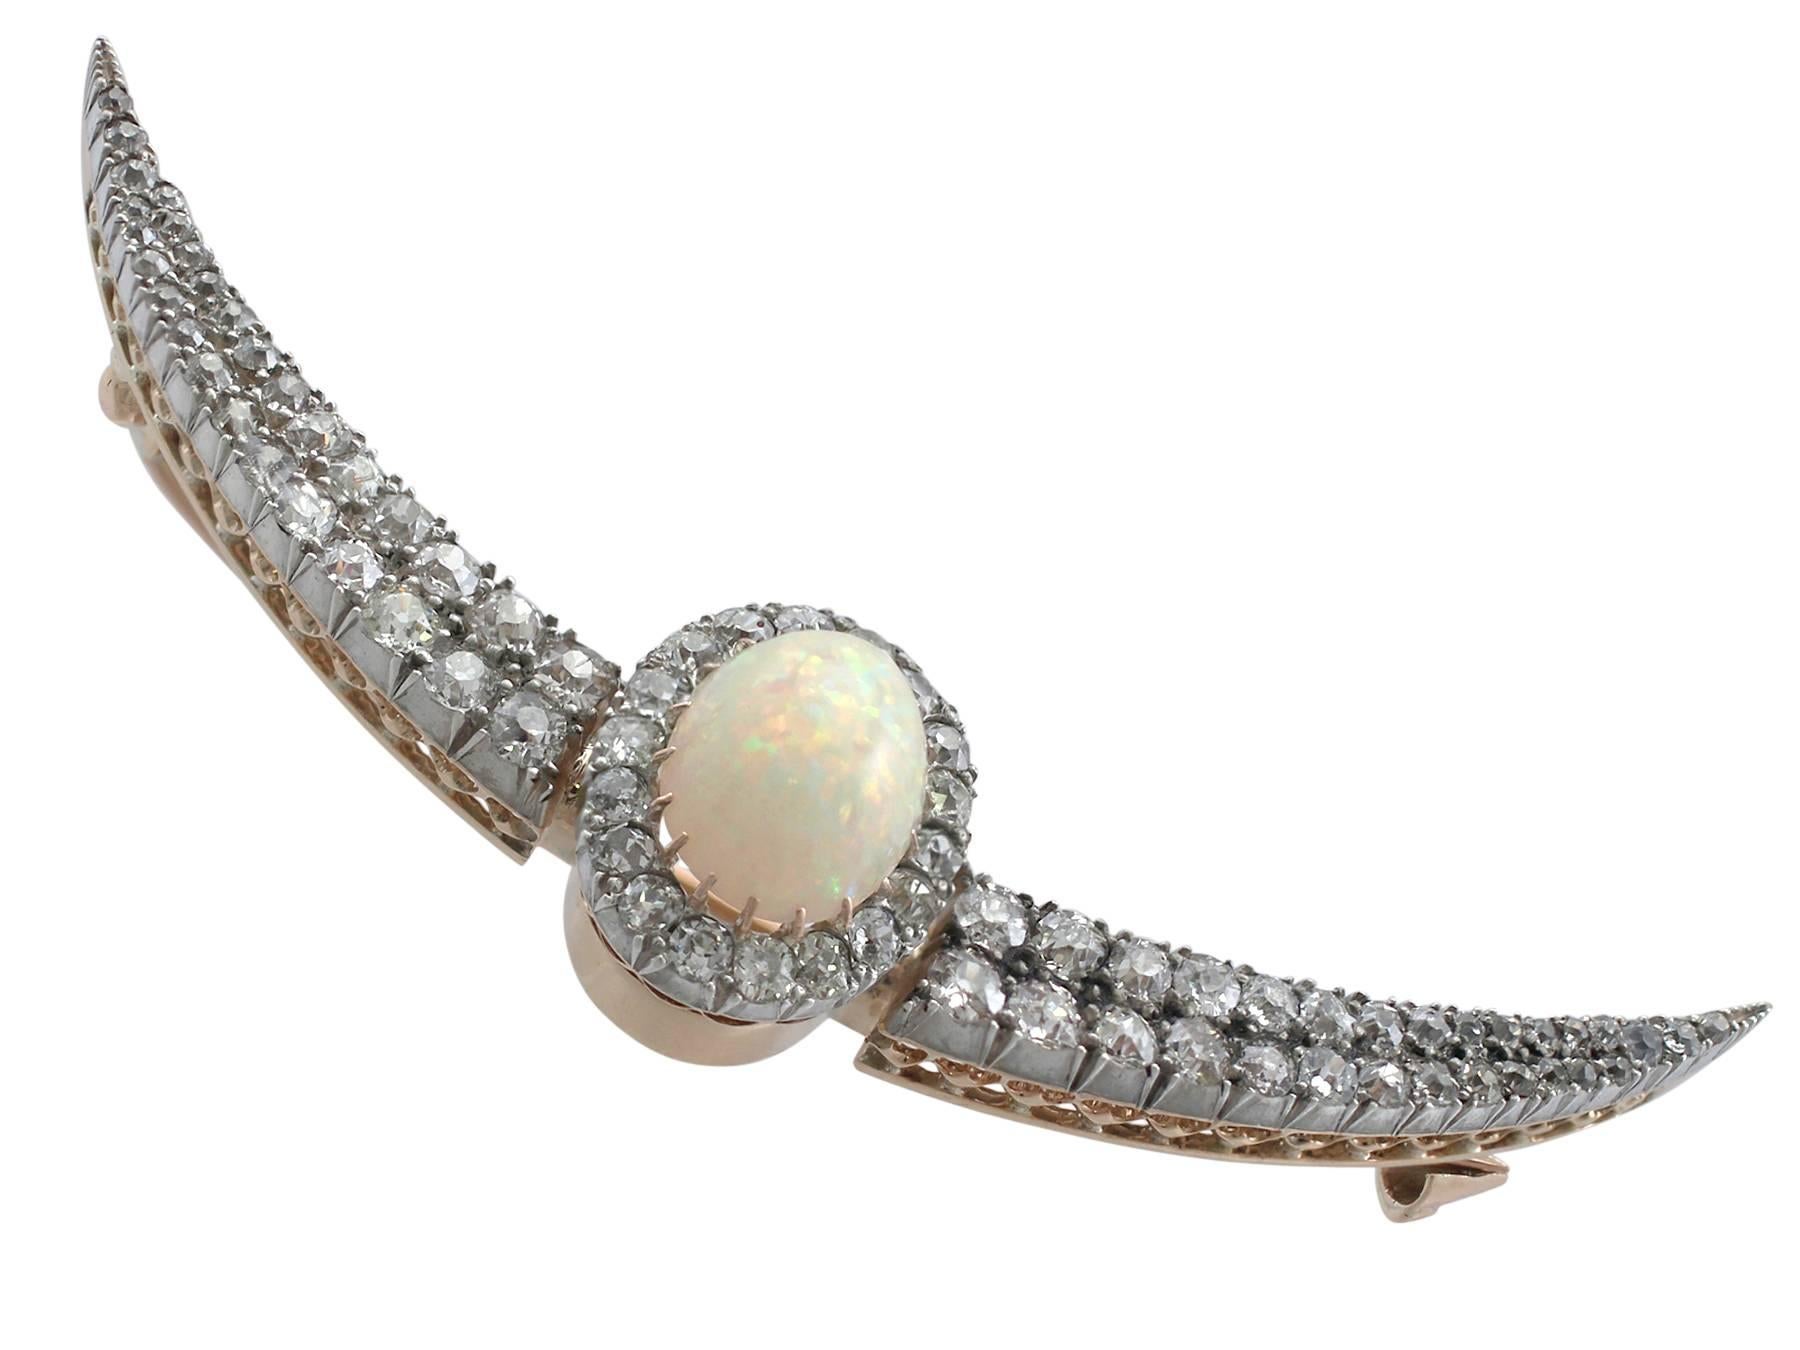 A stunning Victorian 4.75 carat opal and 4.45 carat diamond, 9 karat yellow gold and silver set crescent brooch; part of our diverse antique jewelry collections

This stunning, large, fine and impressive cabochon cut opal and diamond brooch has been